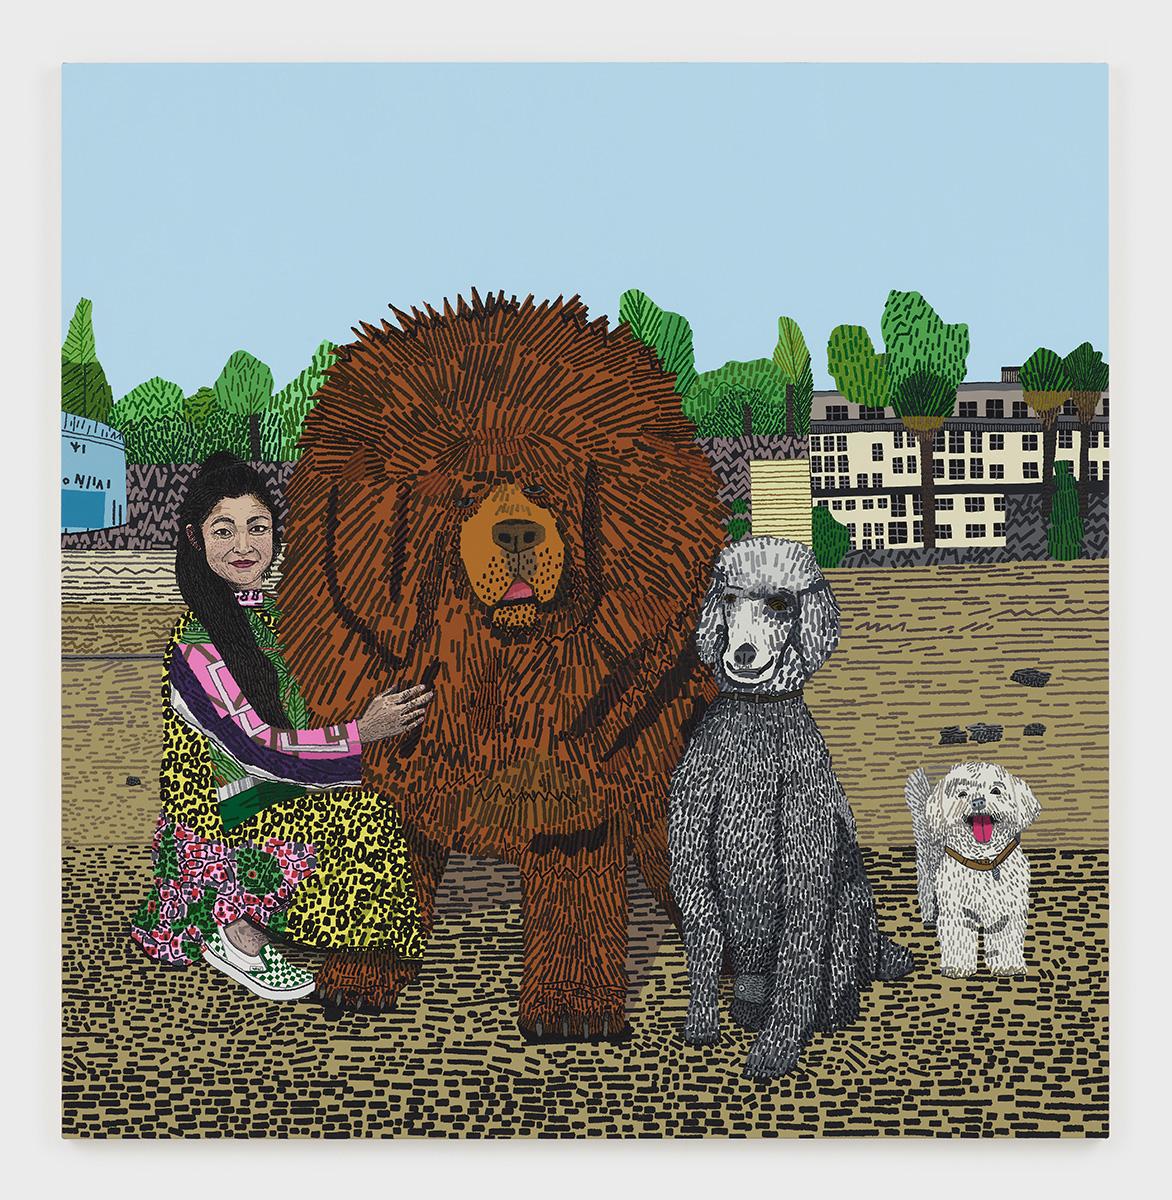 Jonas Wood Shio with Three Dogs, 2020 oil and acrylic on canvas 76 x 74 inches (193 x 188 cm) (Inv# JW 21.028) Photography: Marten Elder Courtesy of the artist and David Kordansky Gallery